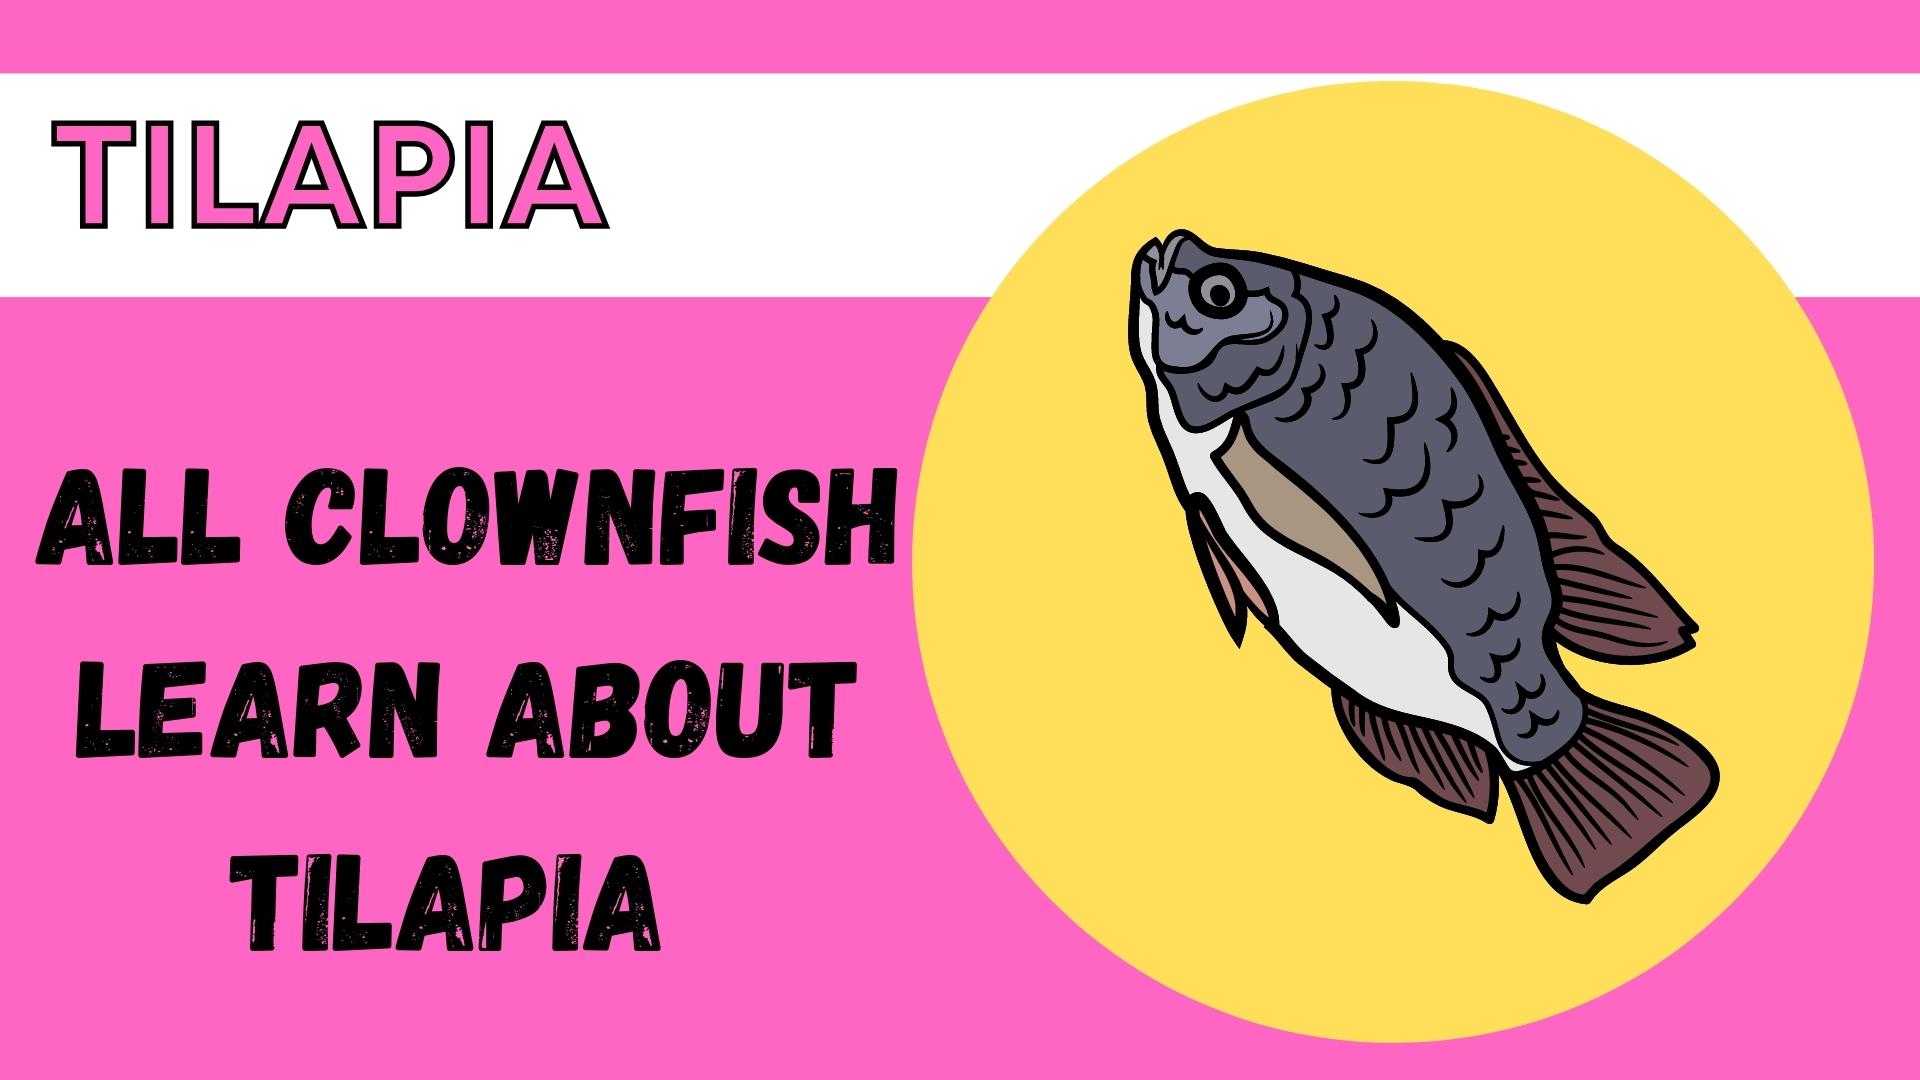 Learn about tilapia